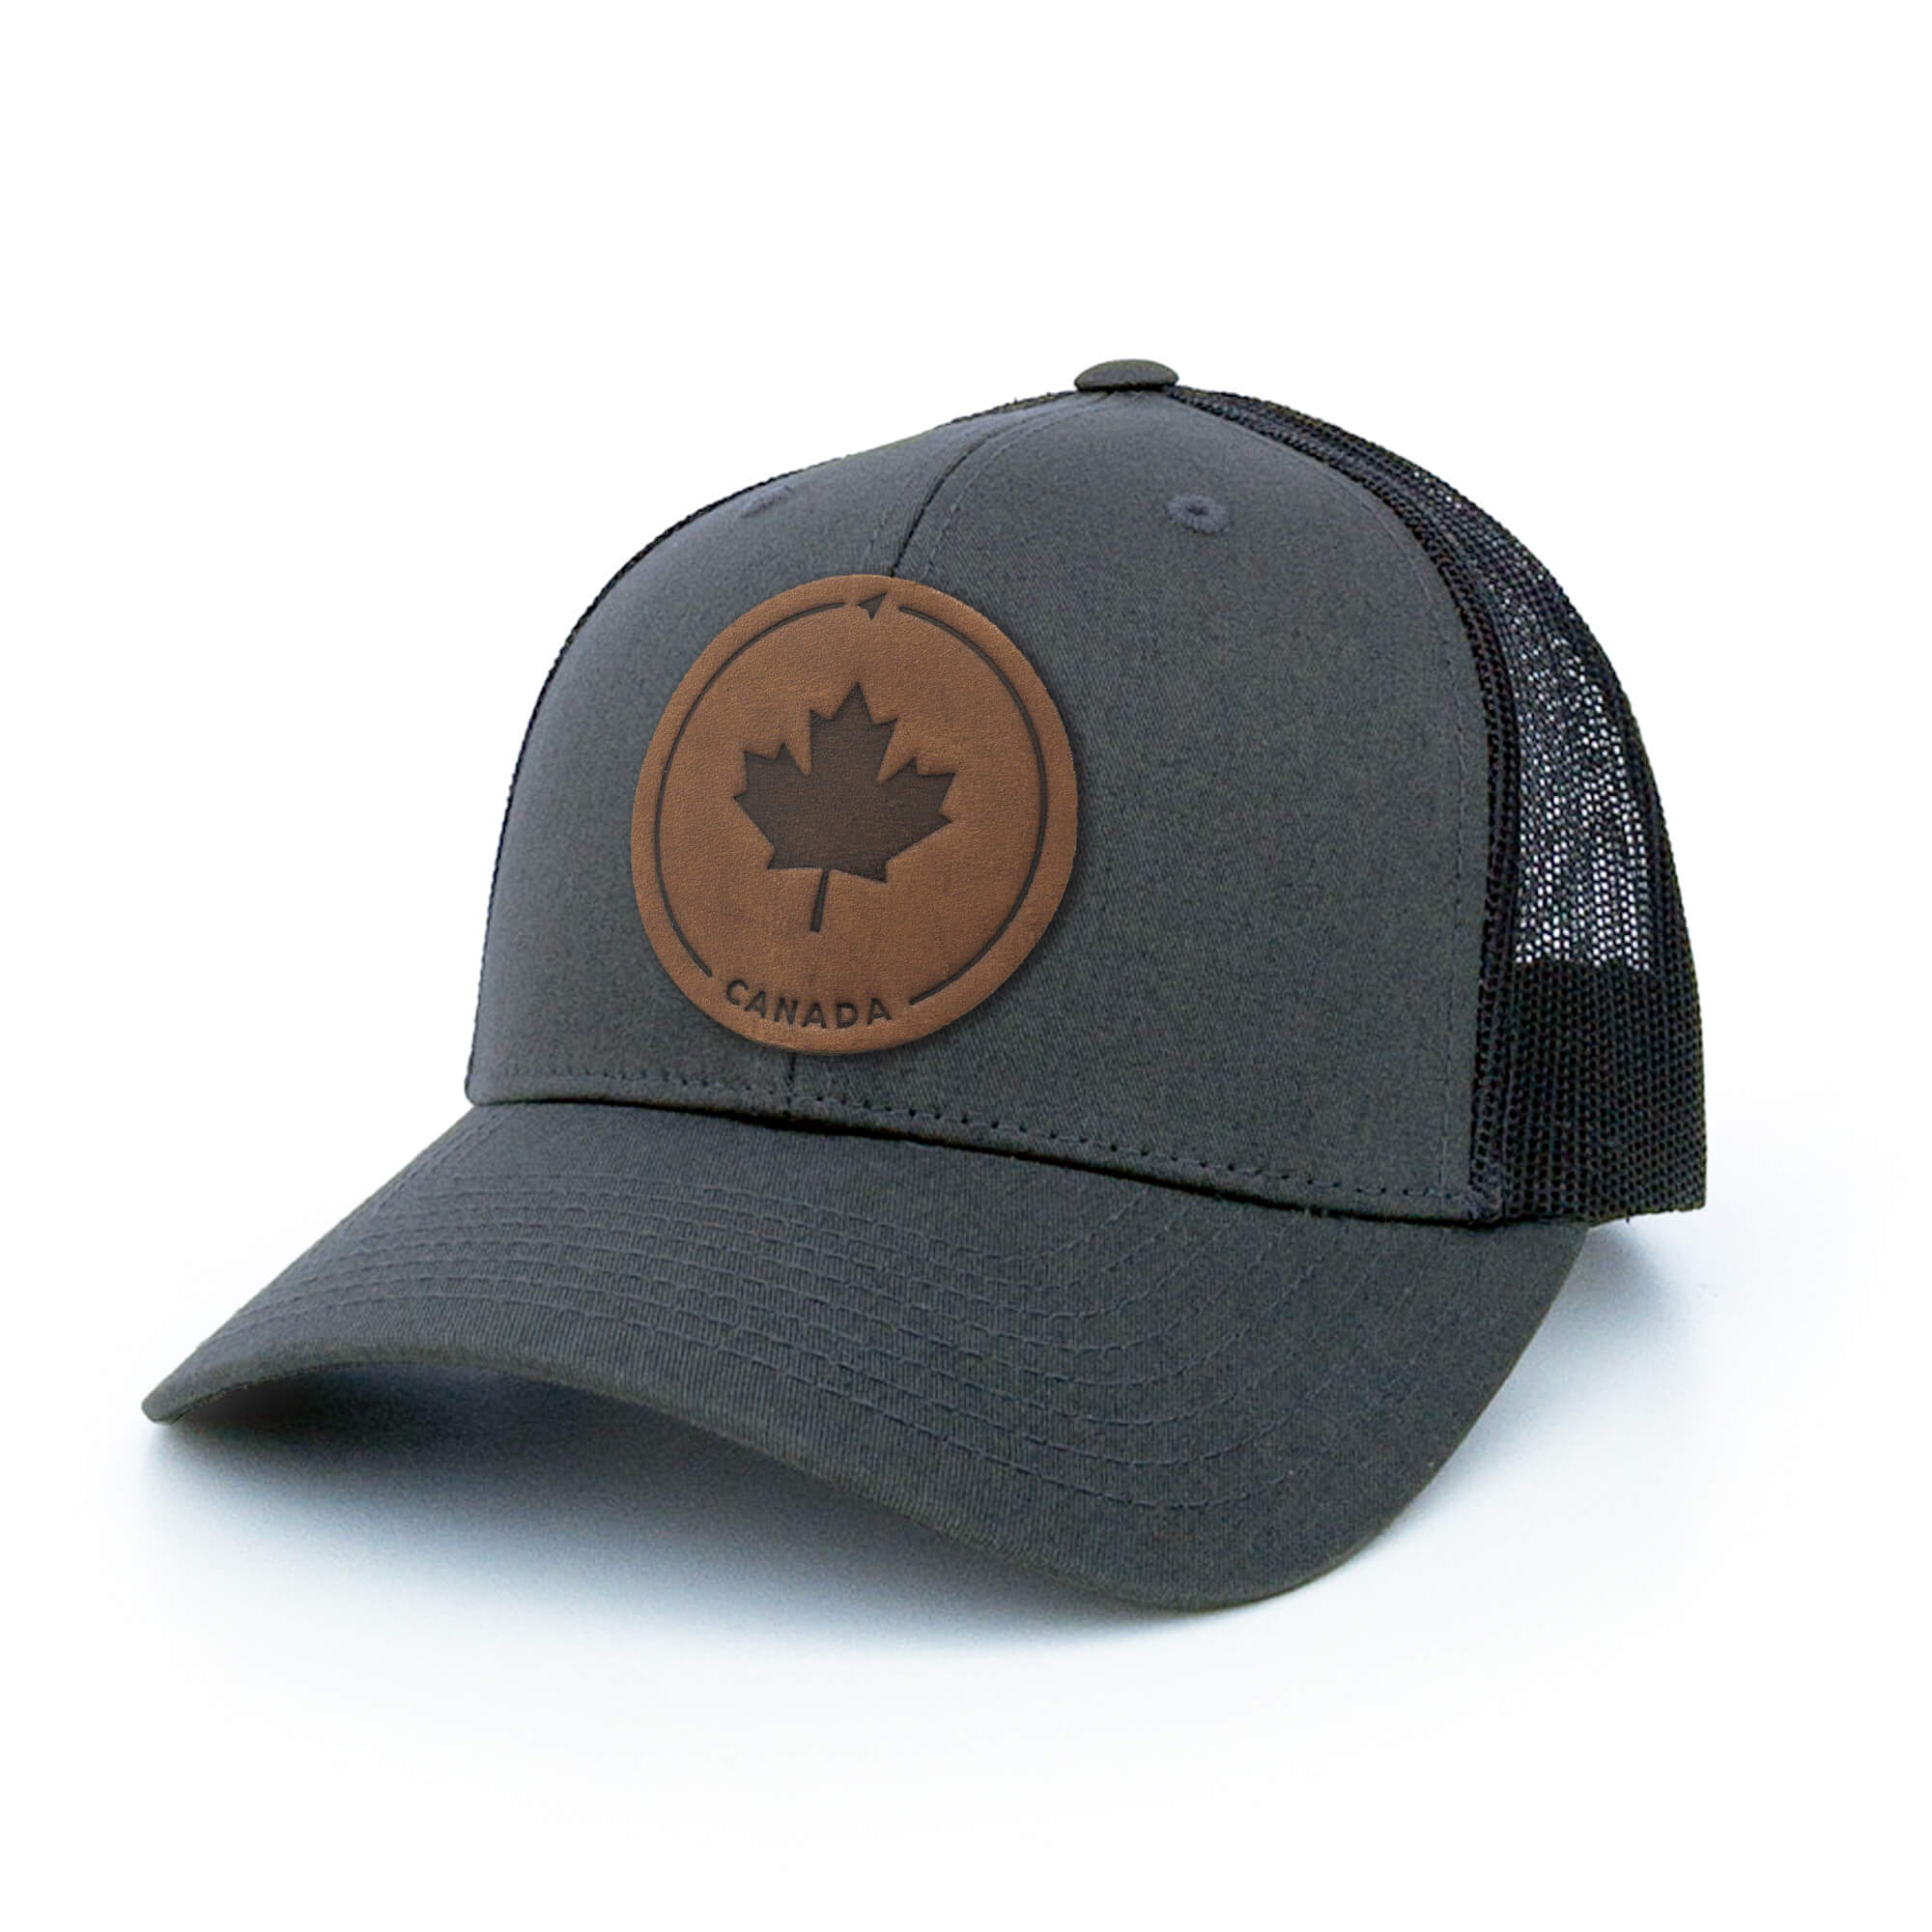 Charcoal trucker hat with full-grain leather patch of Maple Leaf | BLACK-002-001, CHARC-002-001, NAVY-002-001, HGREY-002-001, MOSS-002-001, BROWN-002-001, RED-002-001